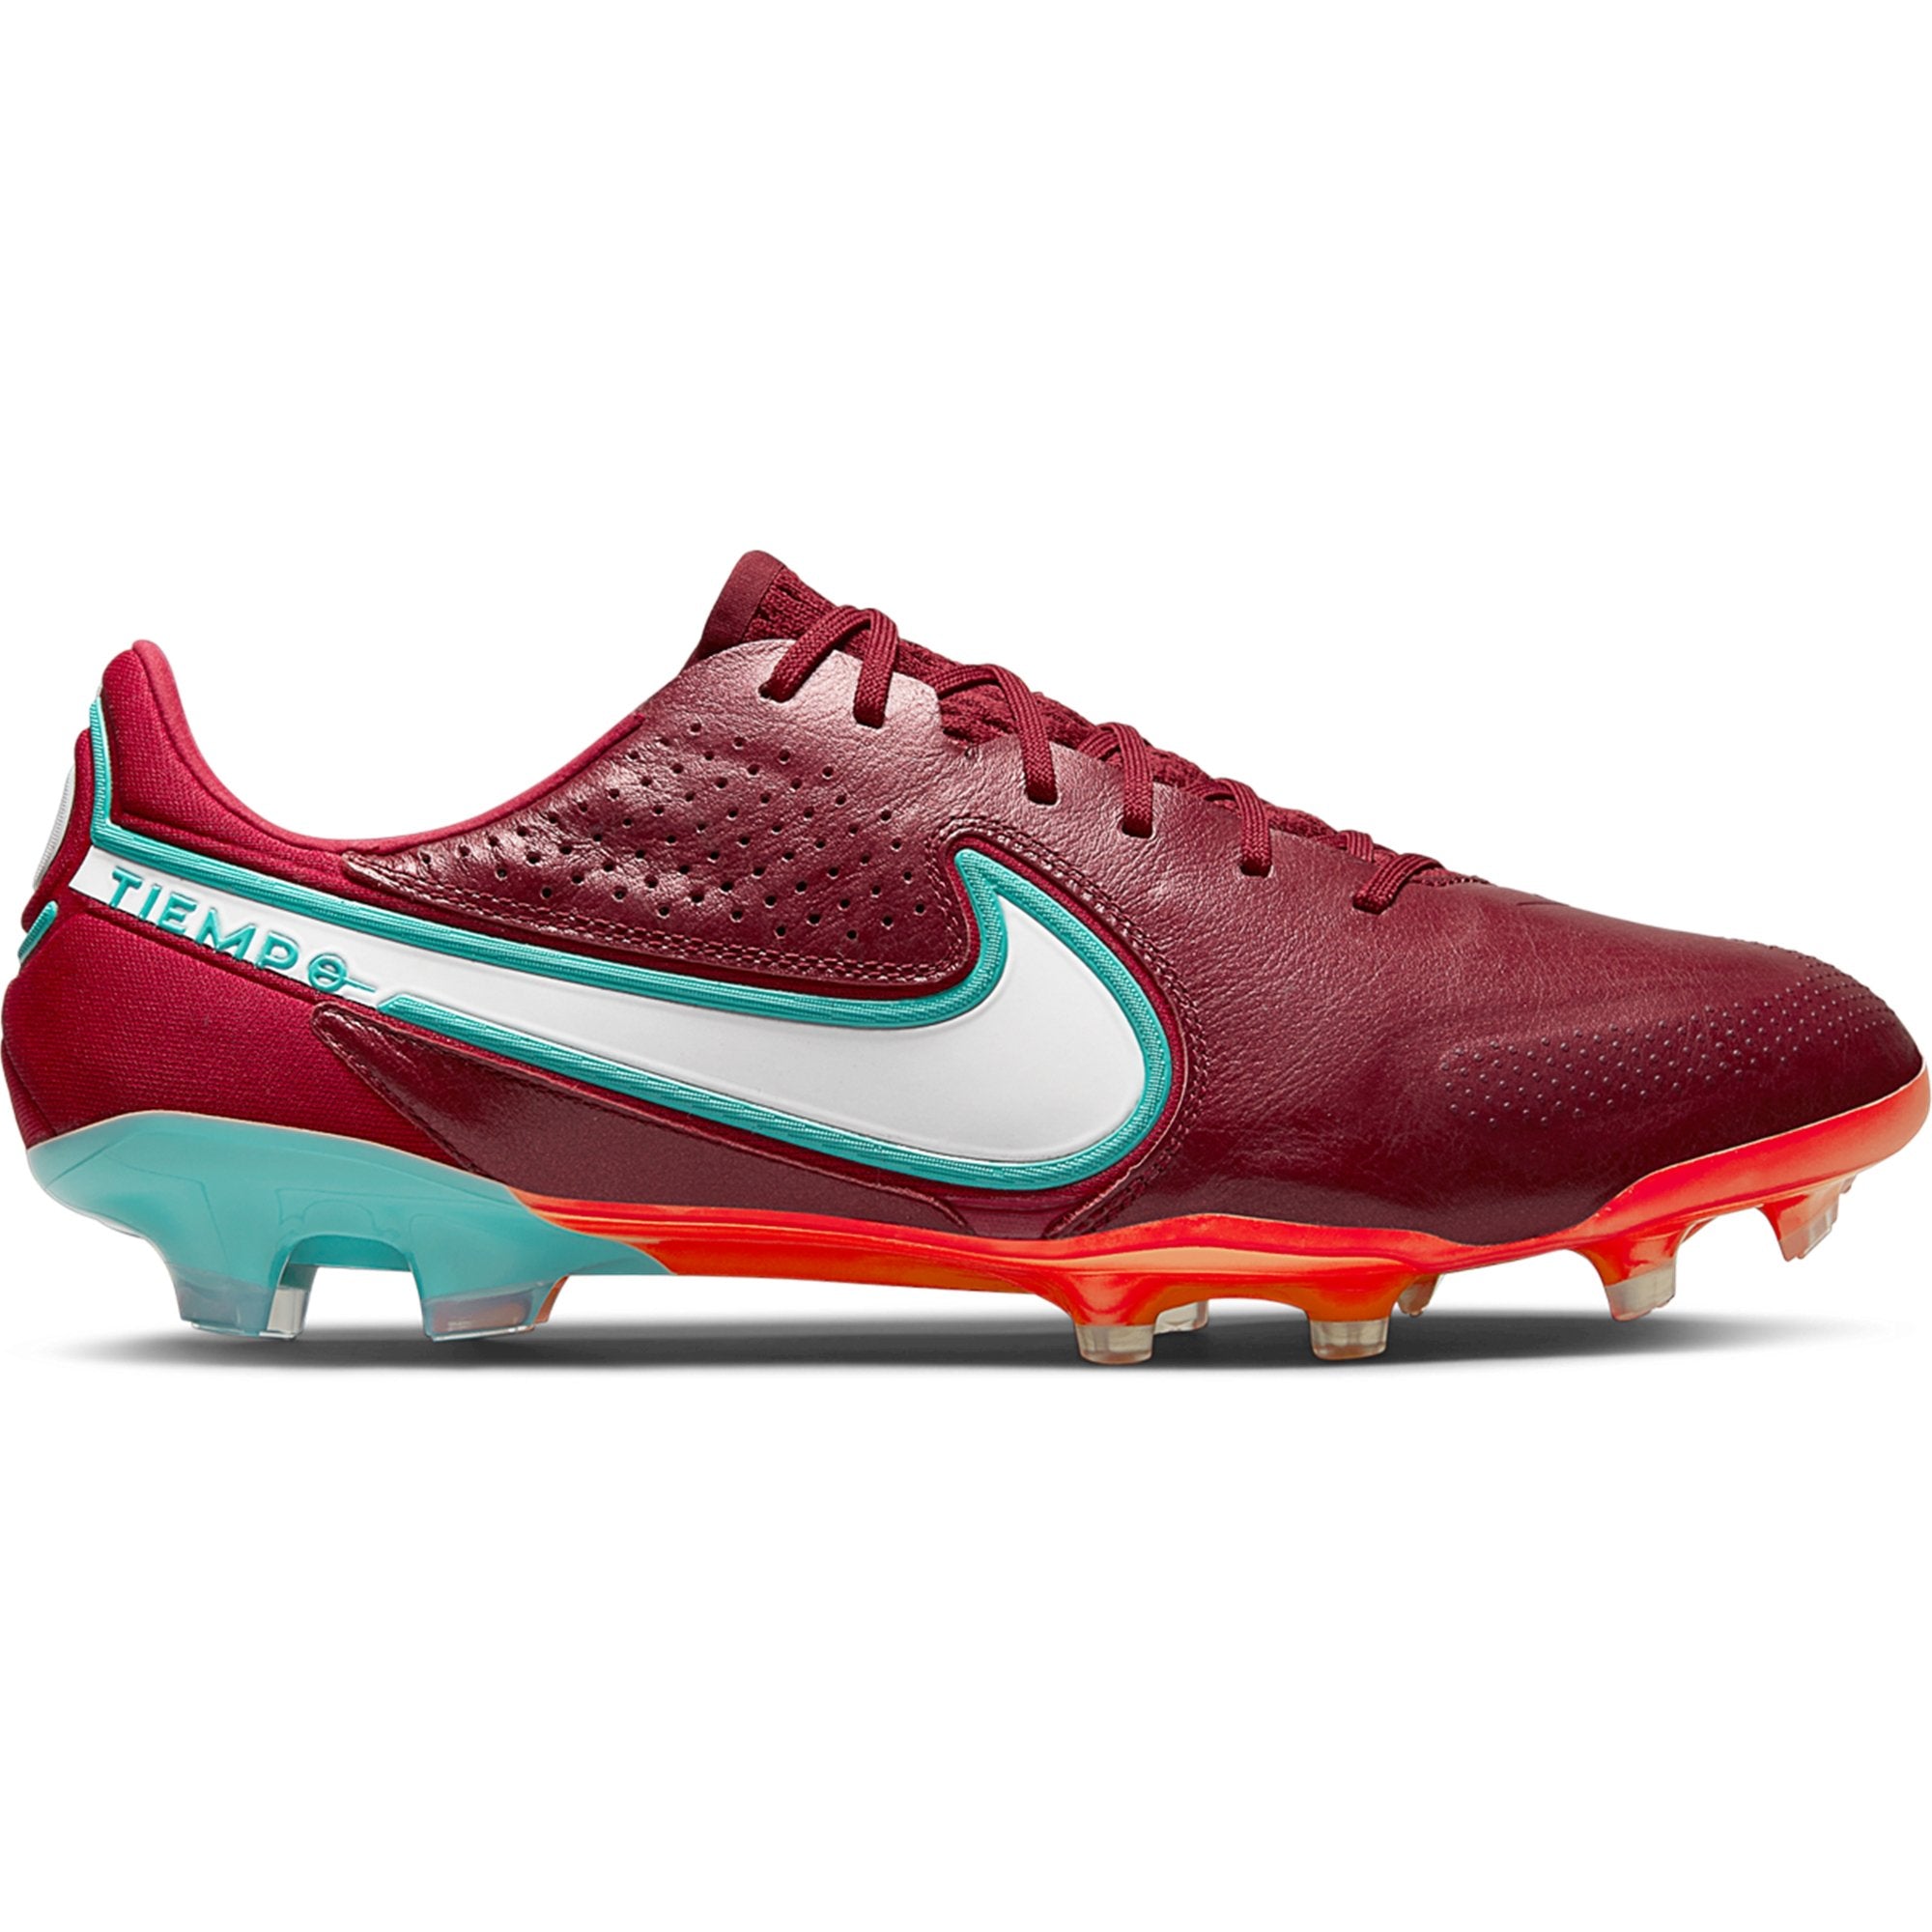 Nike Legend 9 Elite FG Firm Ground Soccer Cleat Team Red/White/Mystic Hibiscus/Bright Crimson/Dynamic Turquoise – Soccer Zone USA